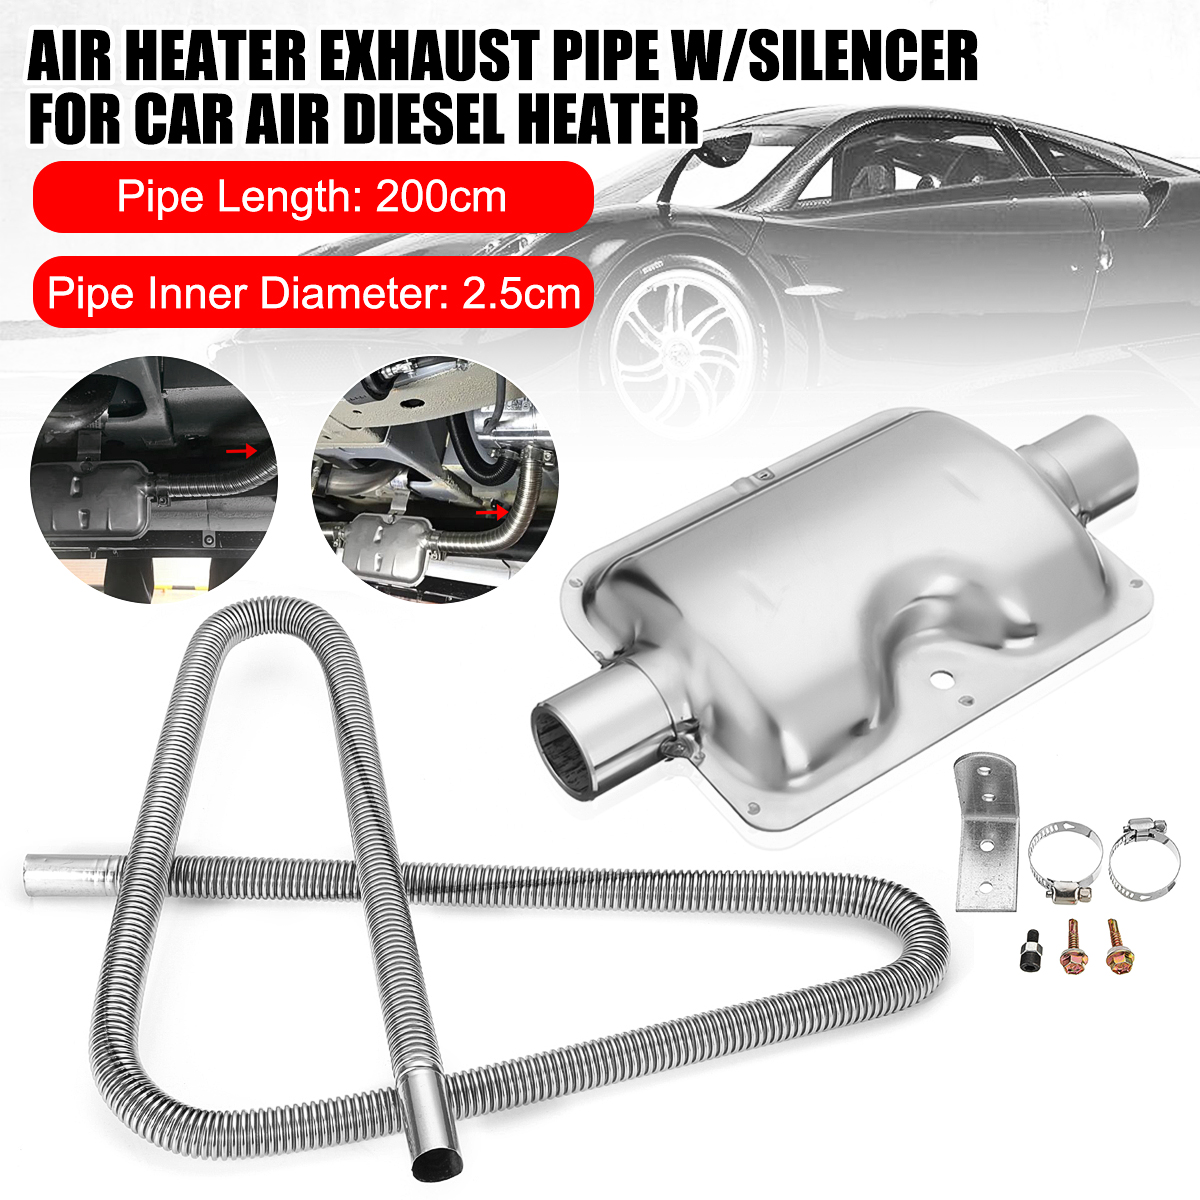 200cm-Stainless-Steel-Exhaust-Pipe-With-Silencer-For-Car-Parking-Air-Diesel-Heater-1593977-2